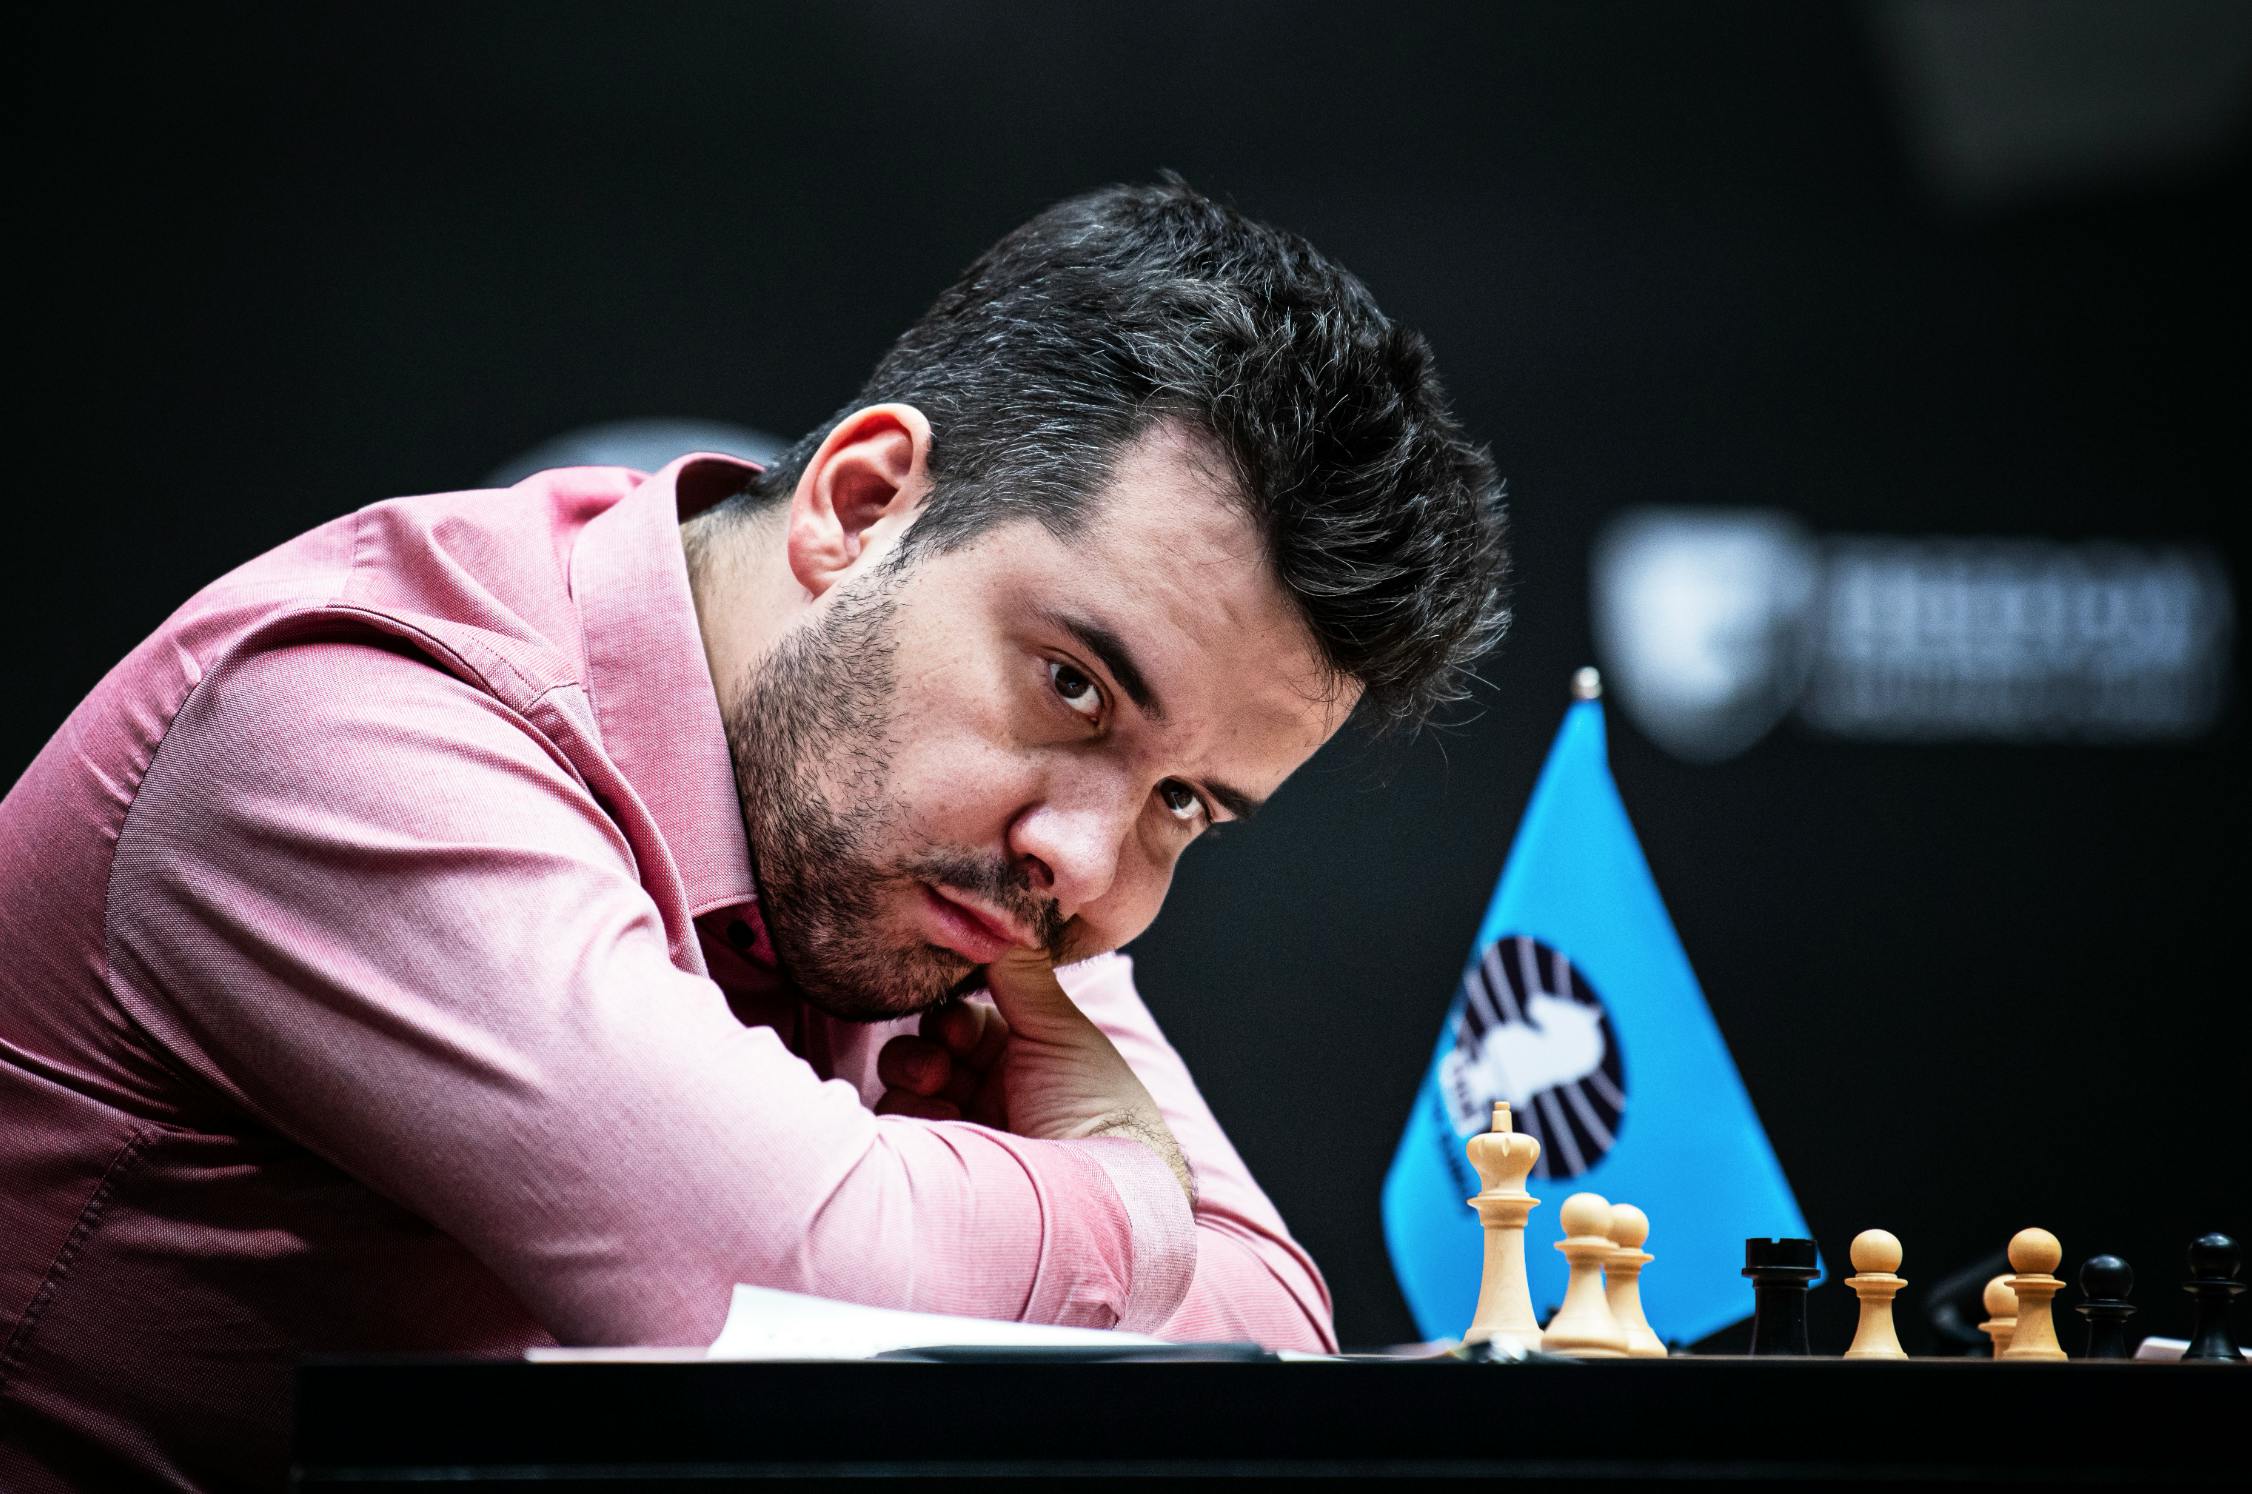 World Chess Championship 2023 Game 10 As It Happened: Ding Liren draws with  Ian Nepomniachtchi, still trails by a point